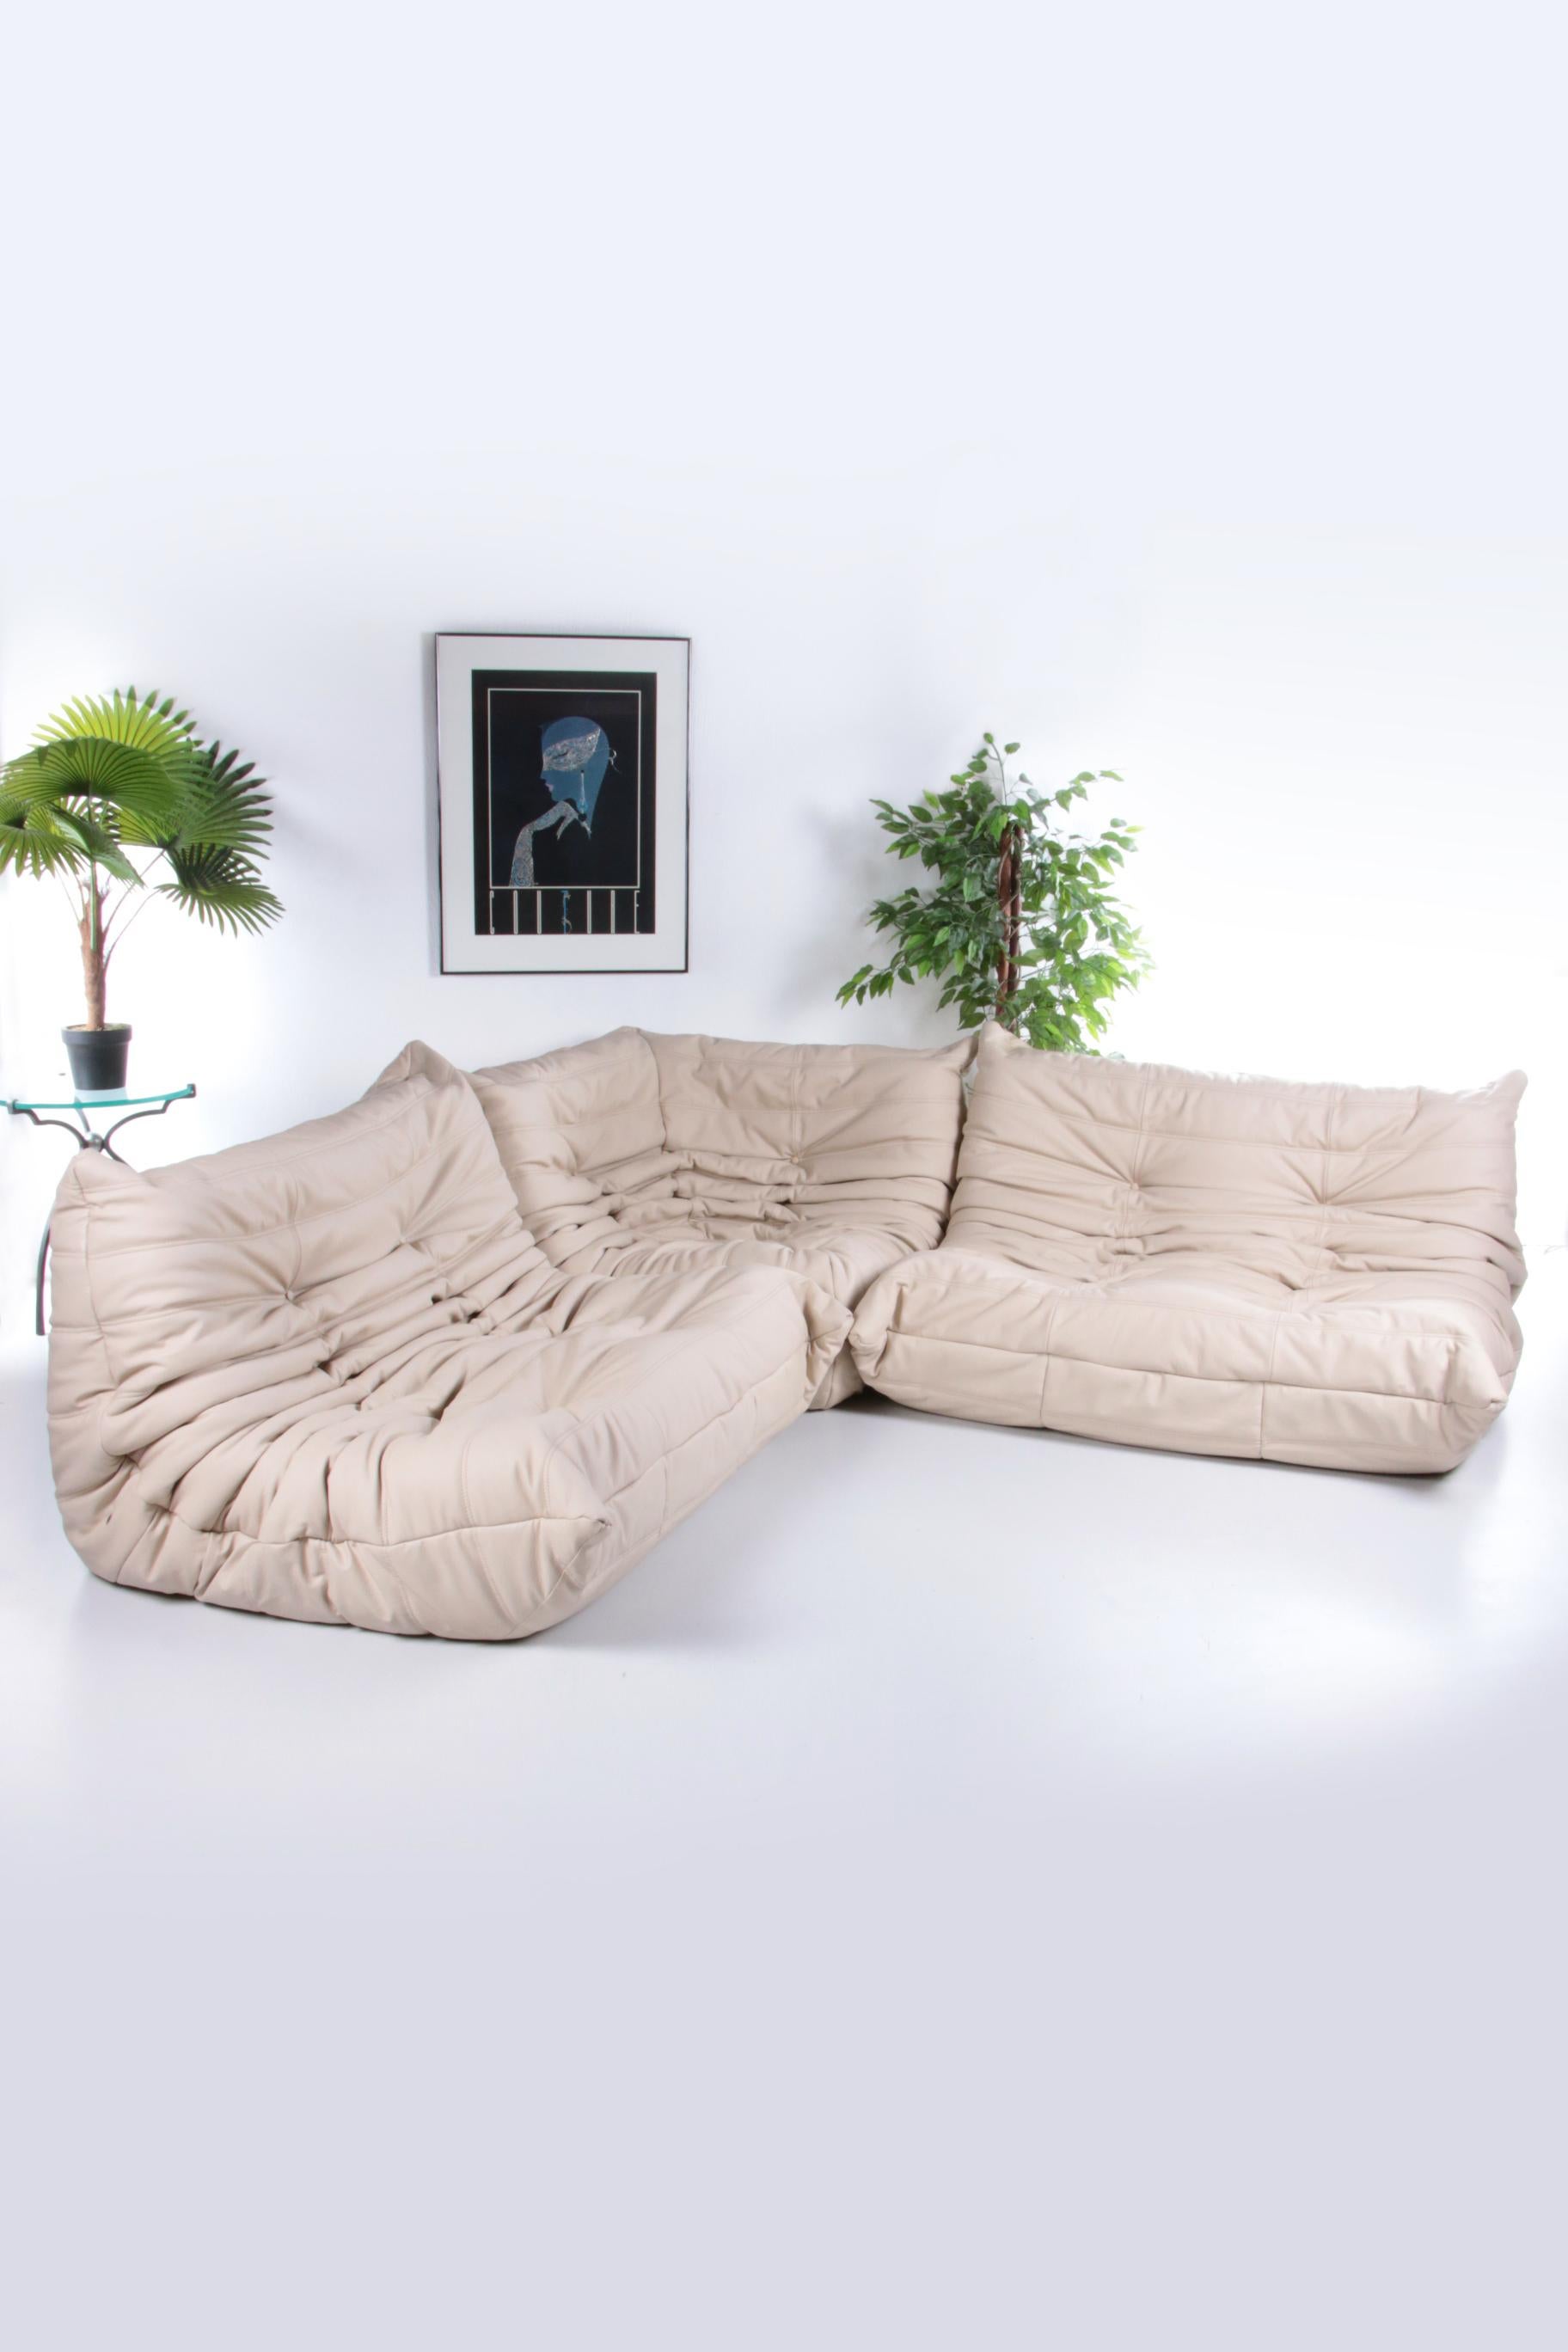 Togo Ligne Roset loose elements design by Michel Ducaroy.

This iconic relax Togo by Ligne Roset, a design by Michel Ducaroy is never out of fashion!

The comfortable design classic from Ligne Roset is highly sought after and will look great in